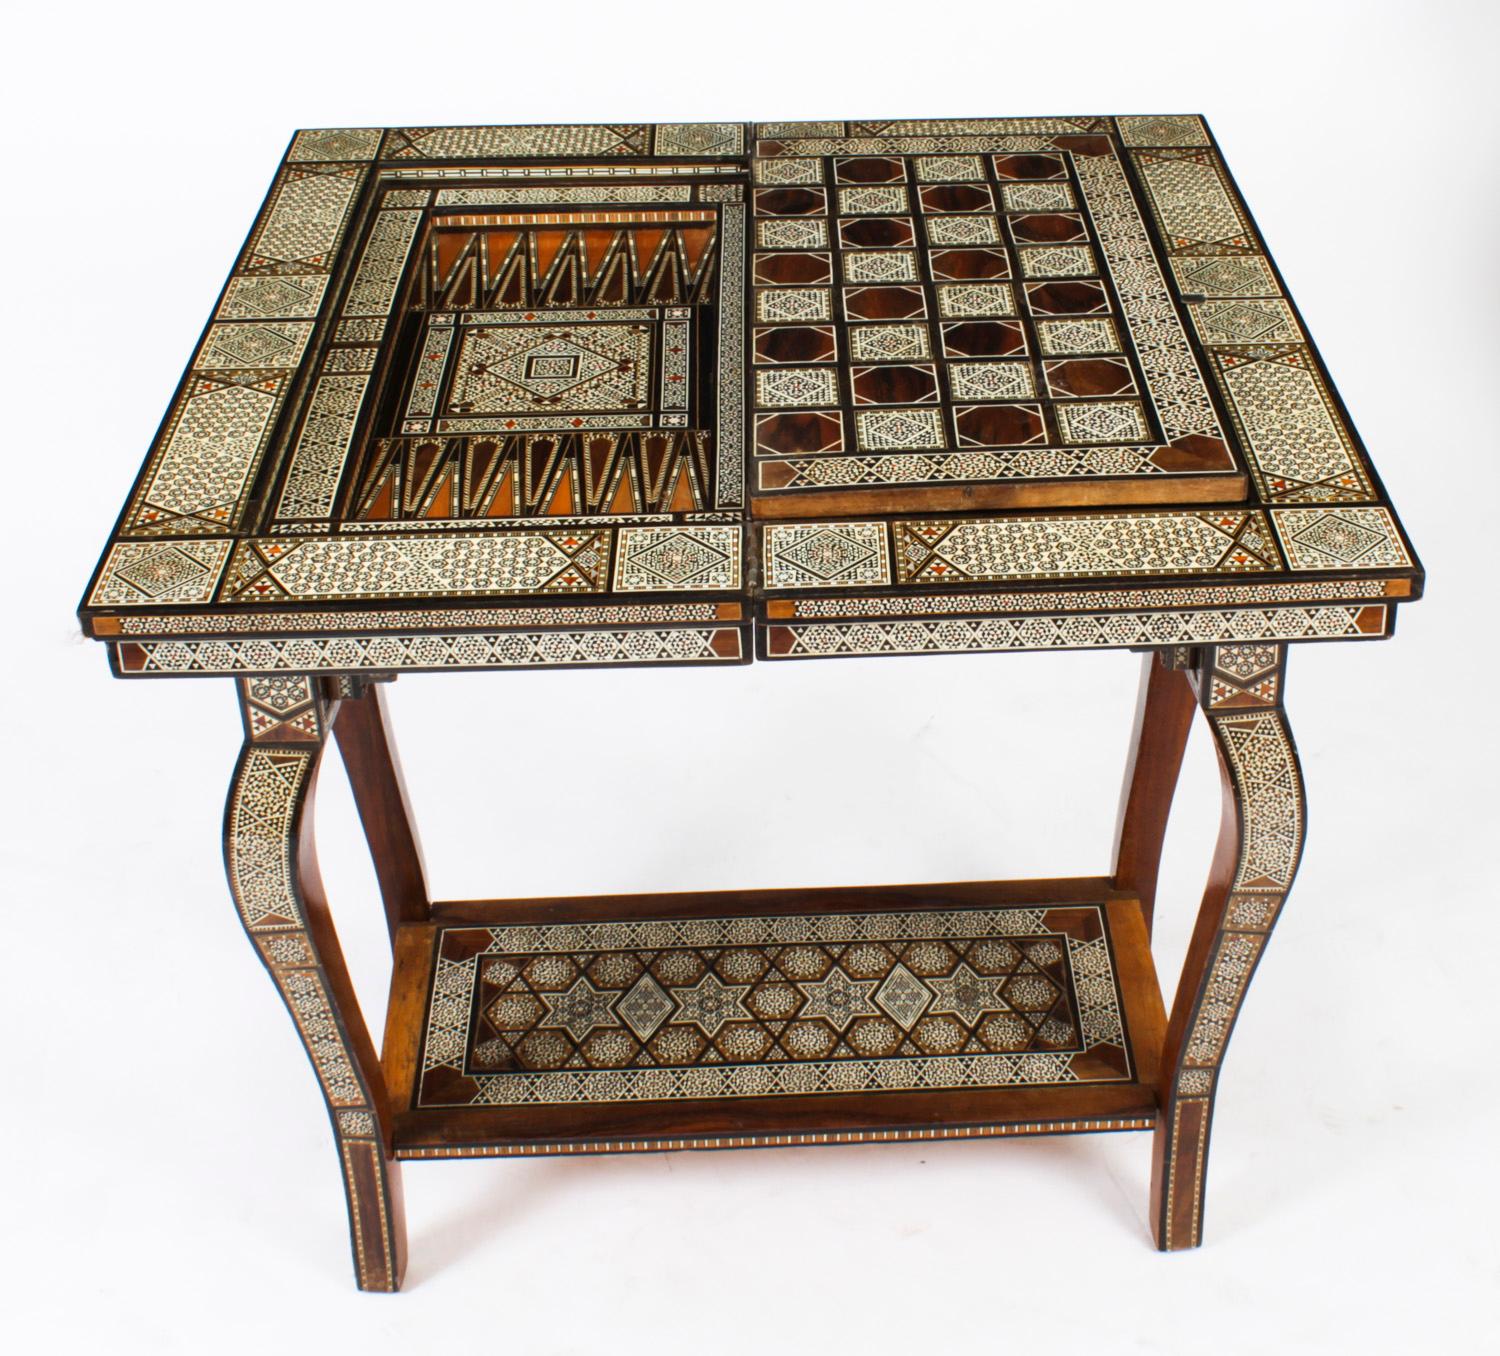 Early 20th Century Antique Syrian Damascus Inlaid Card, Chess, Backgammon, Games Table, 1910s